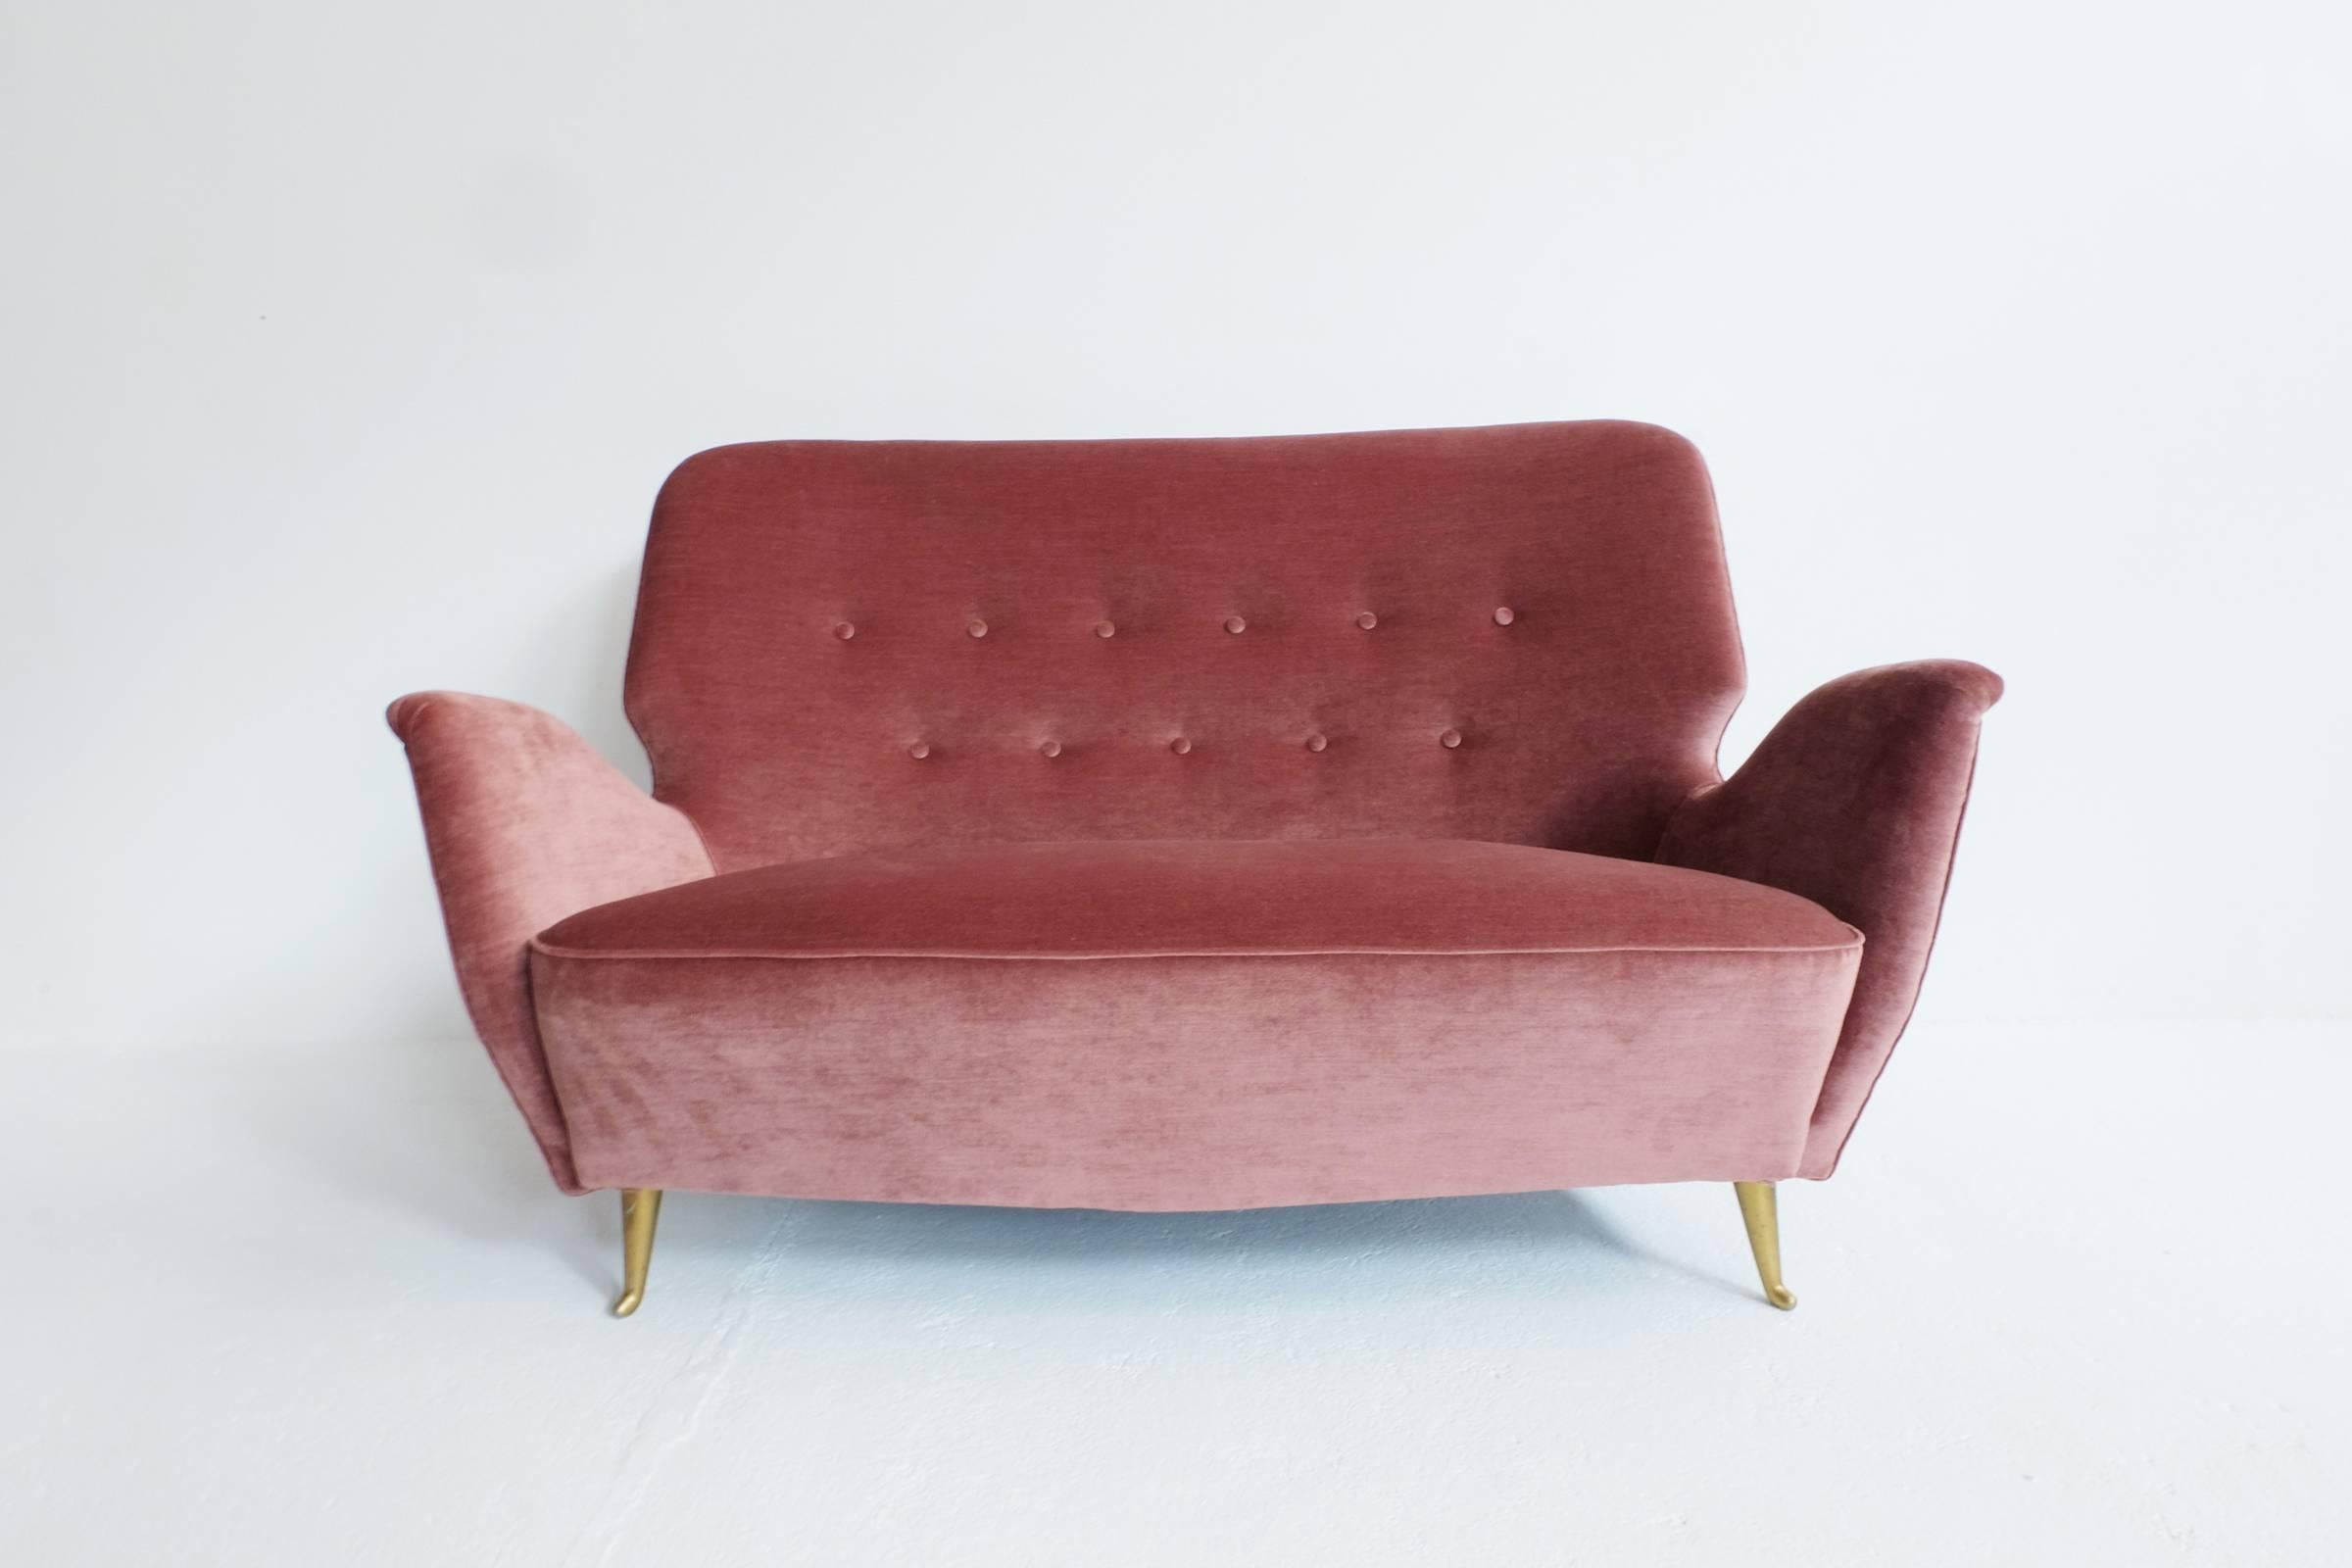 Small elegant and cozy sofa reupholstered in new dust rose velvet with gilt metal legs.
Made by Arredamenti ISA, Bergamo.